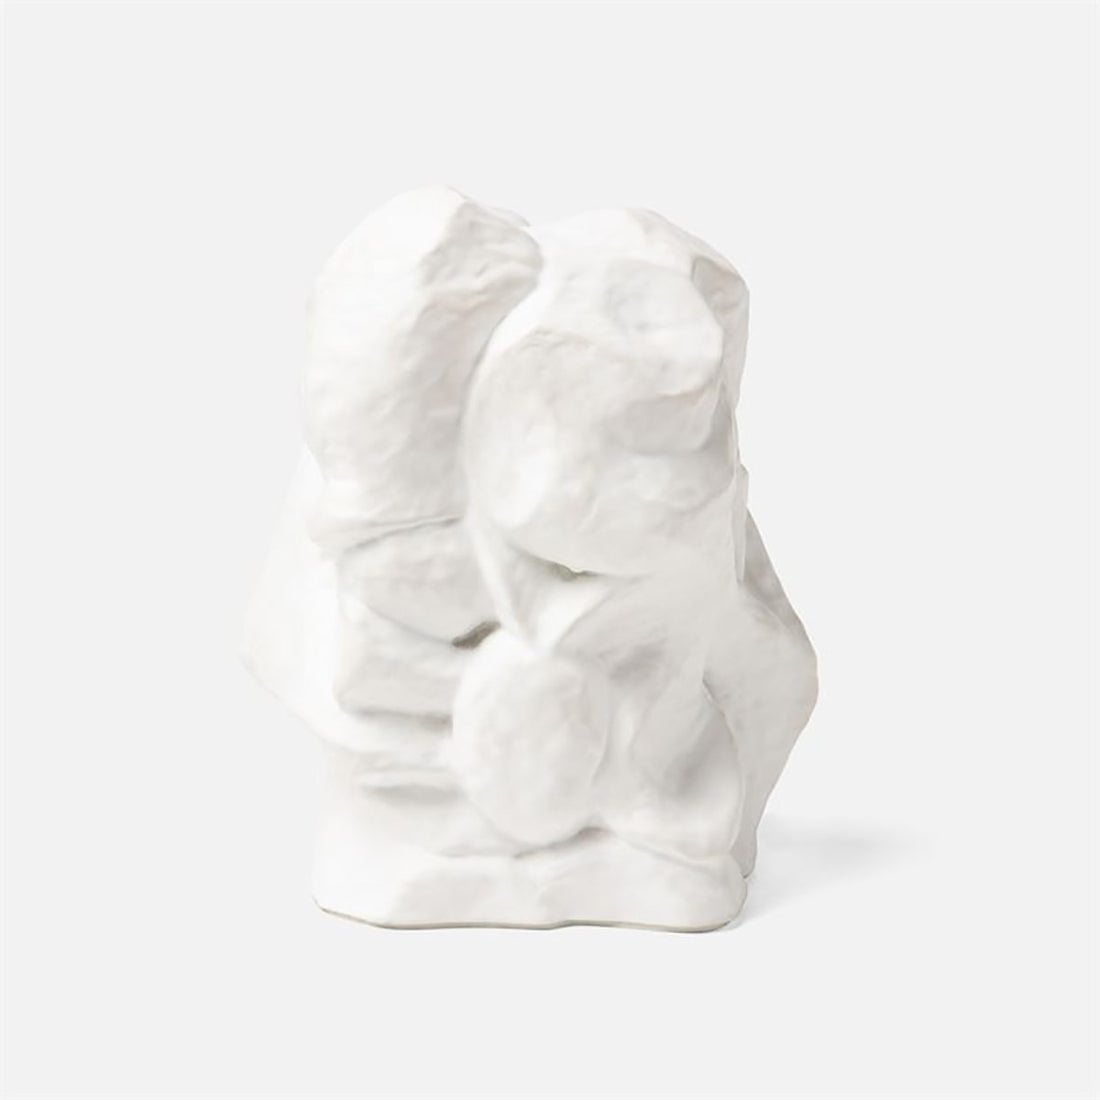 Made Goods Morpheus 12-Inch Solid Resin Object